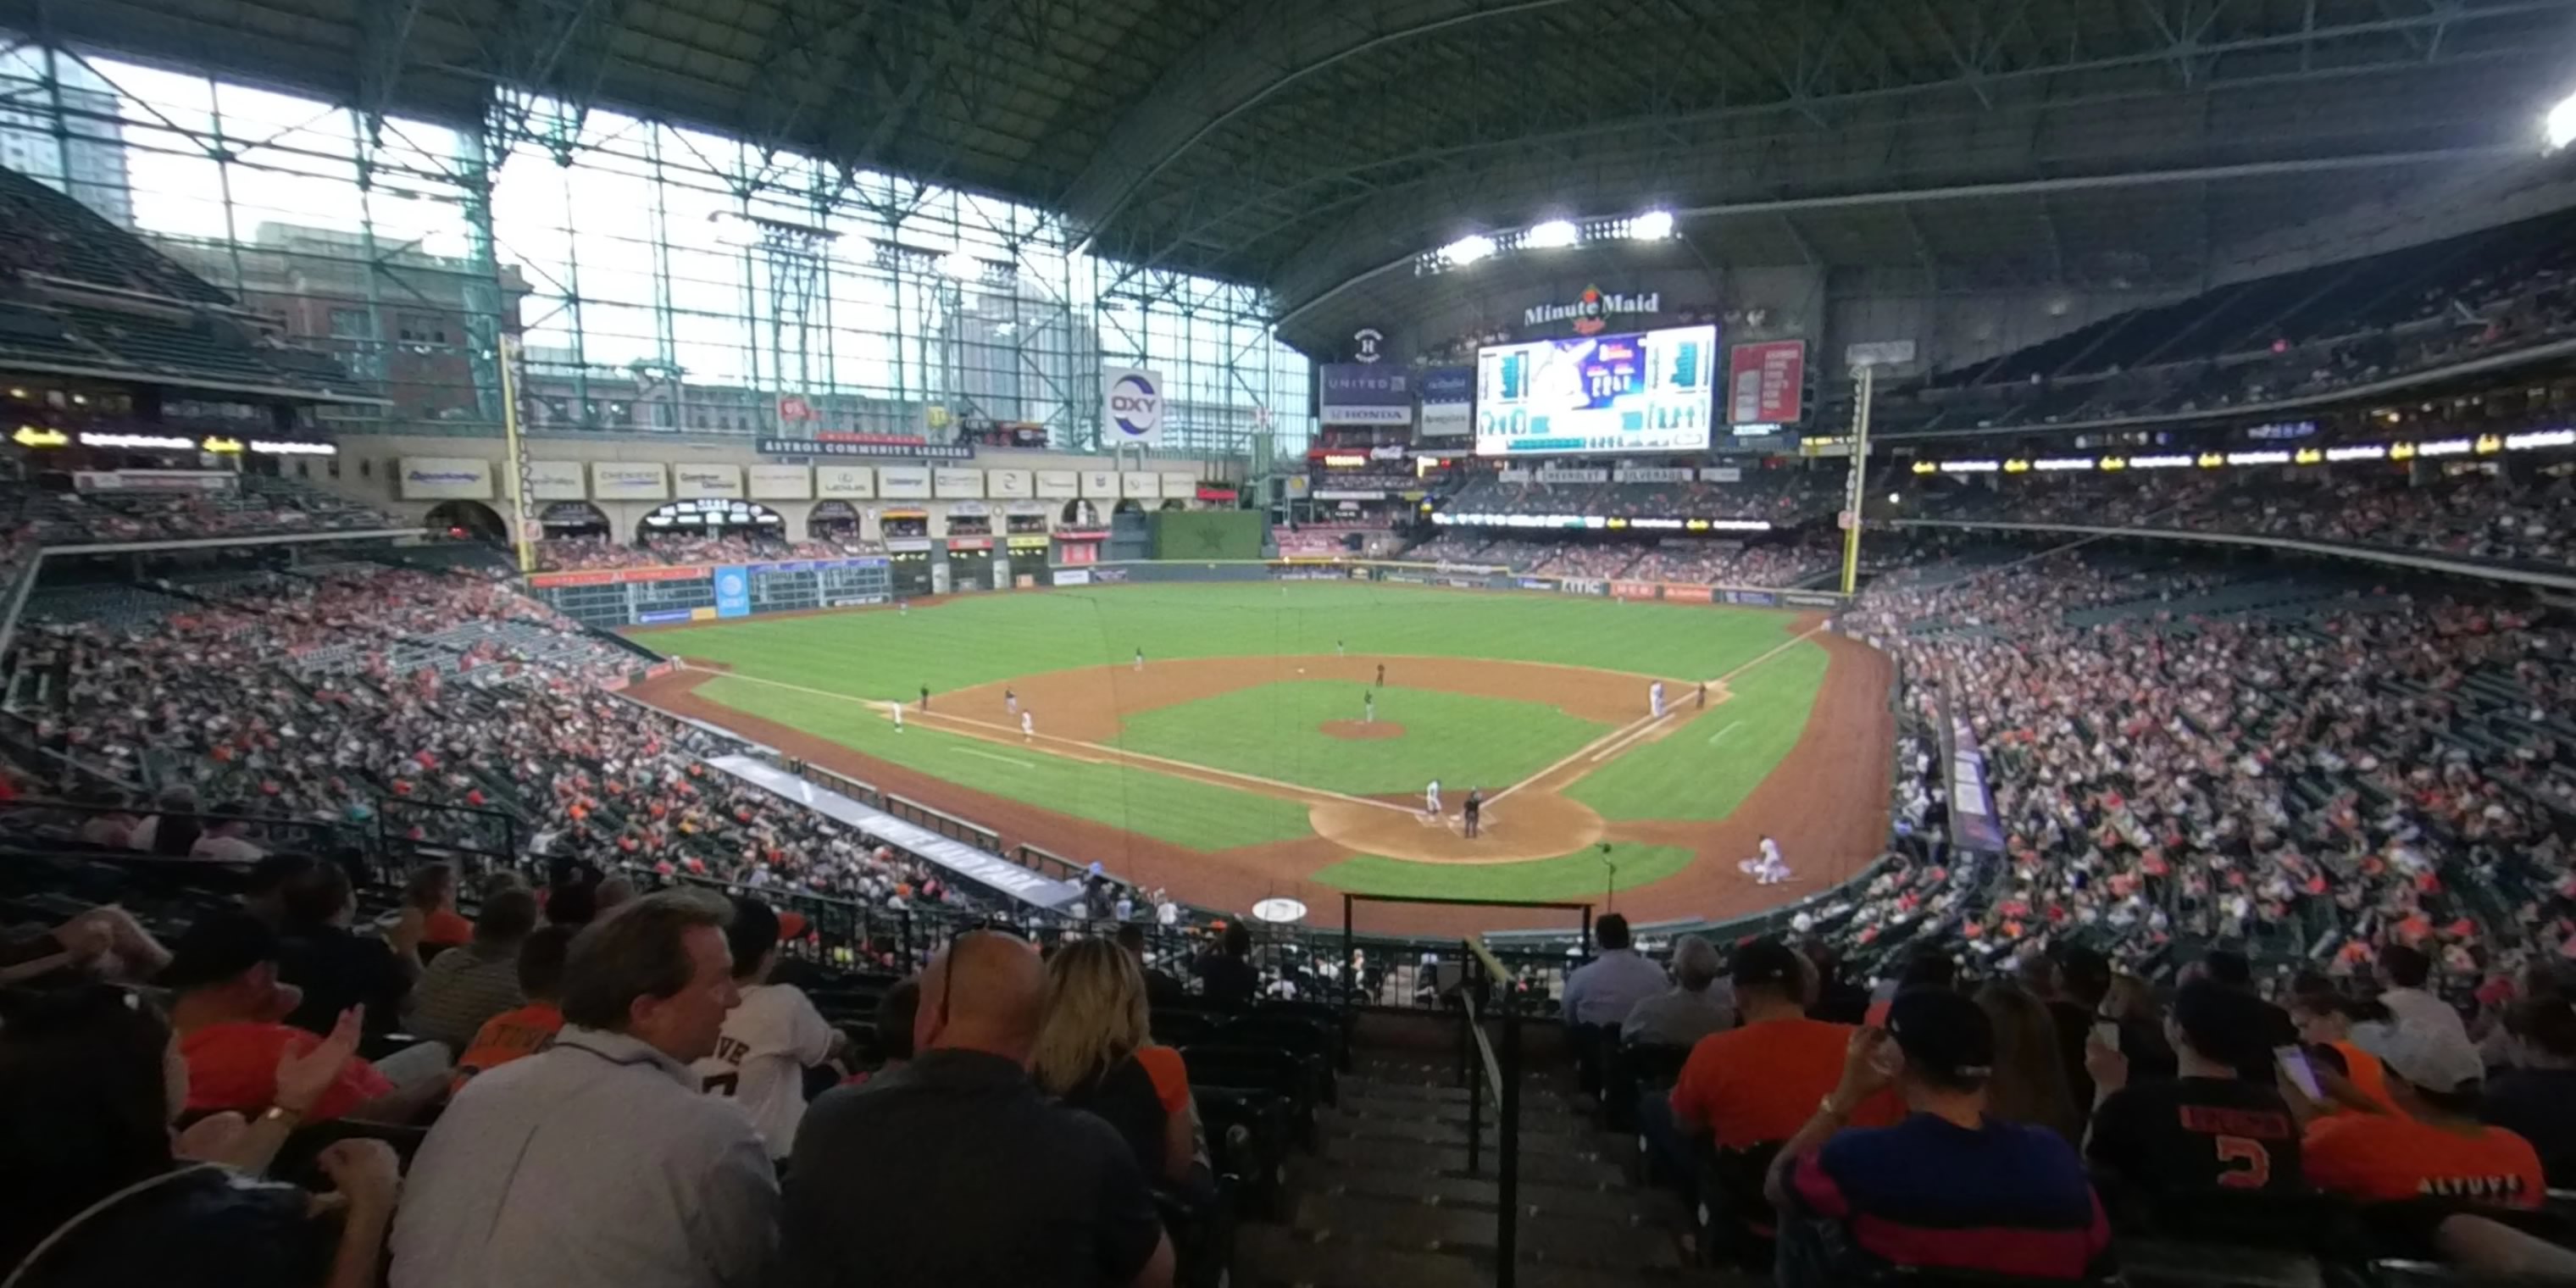 Section 218 at Minute Maid Park 